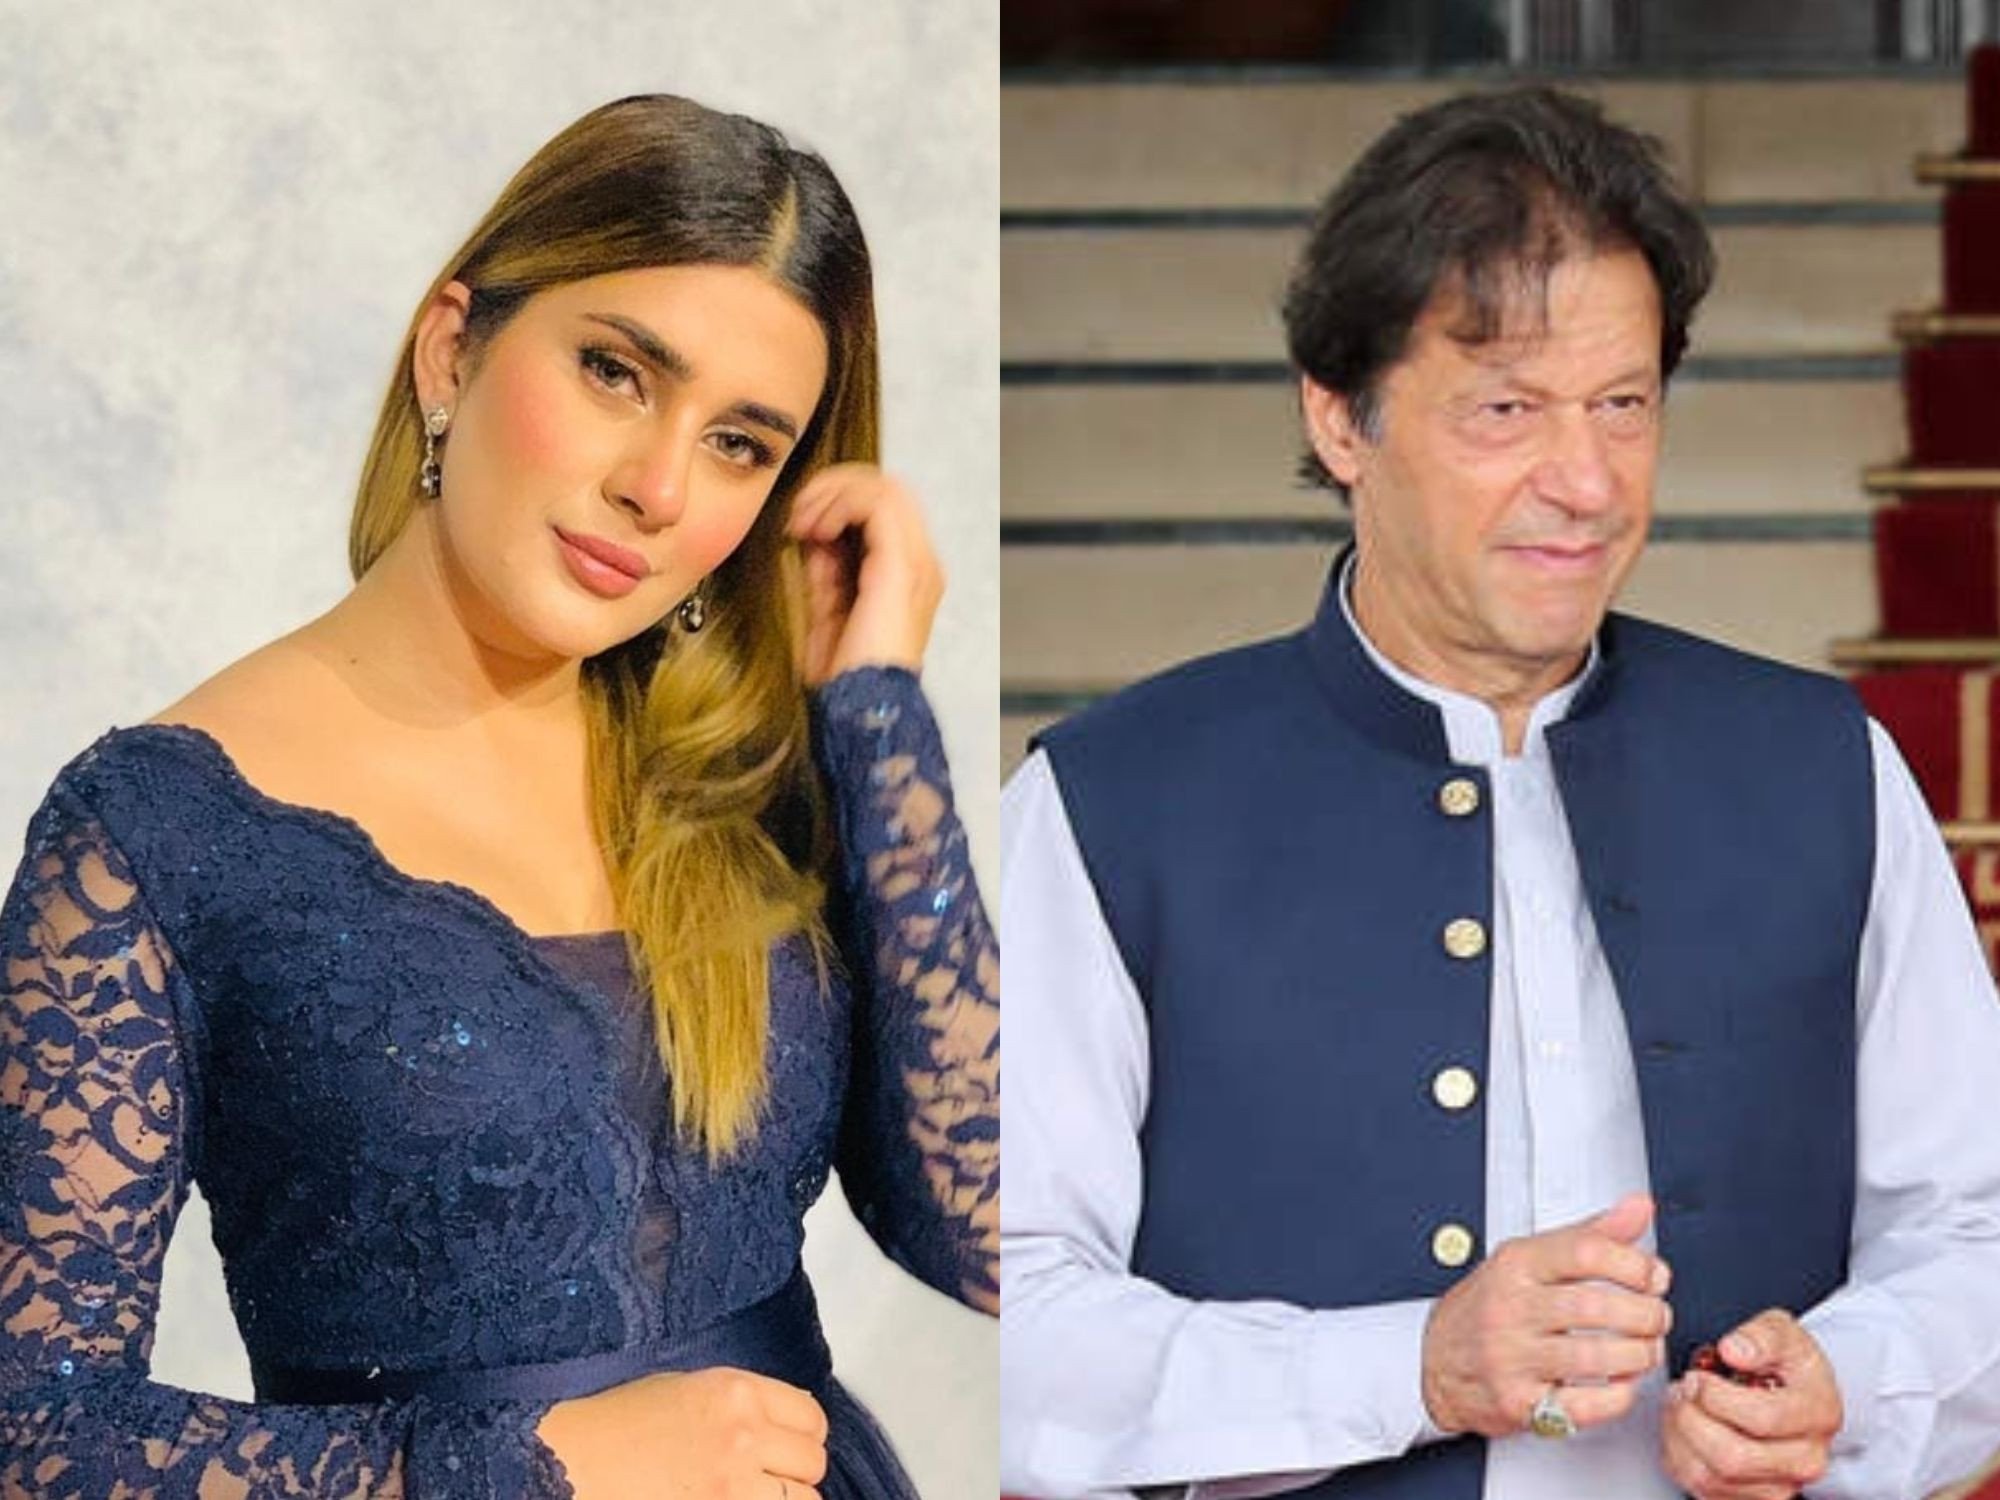 Qb and other celebs who hate imran khan